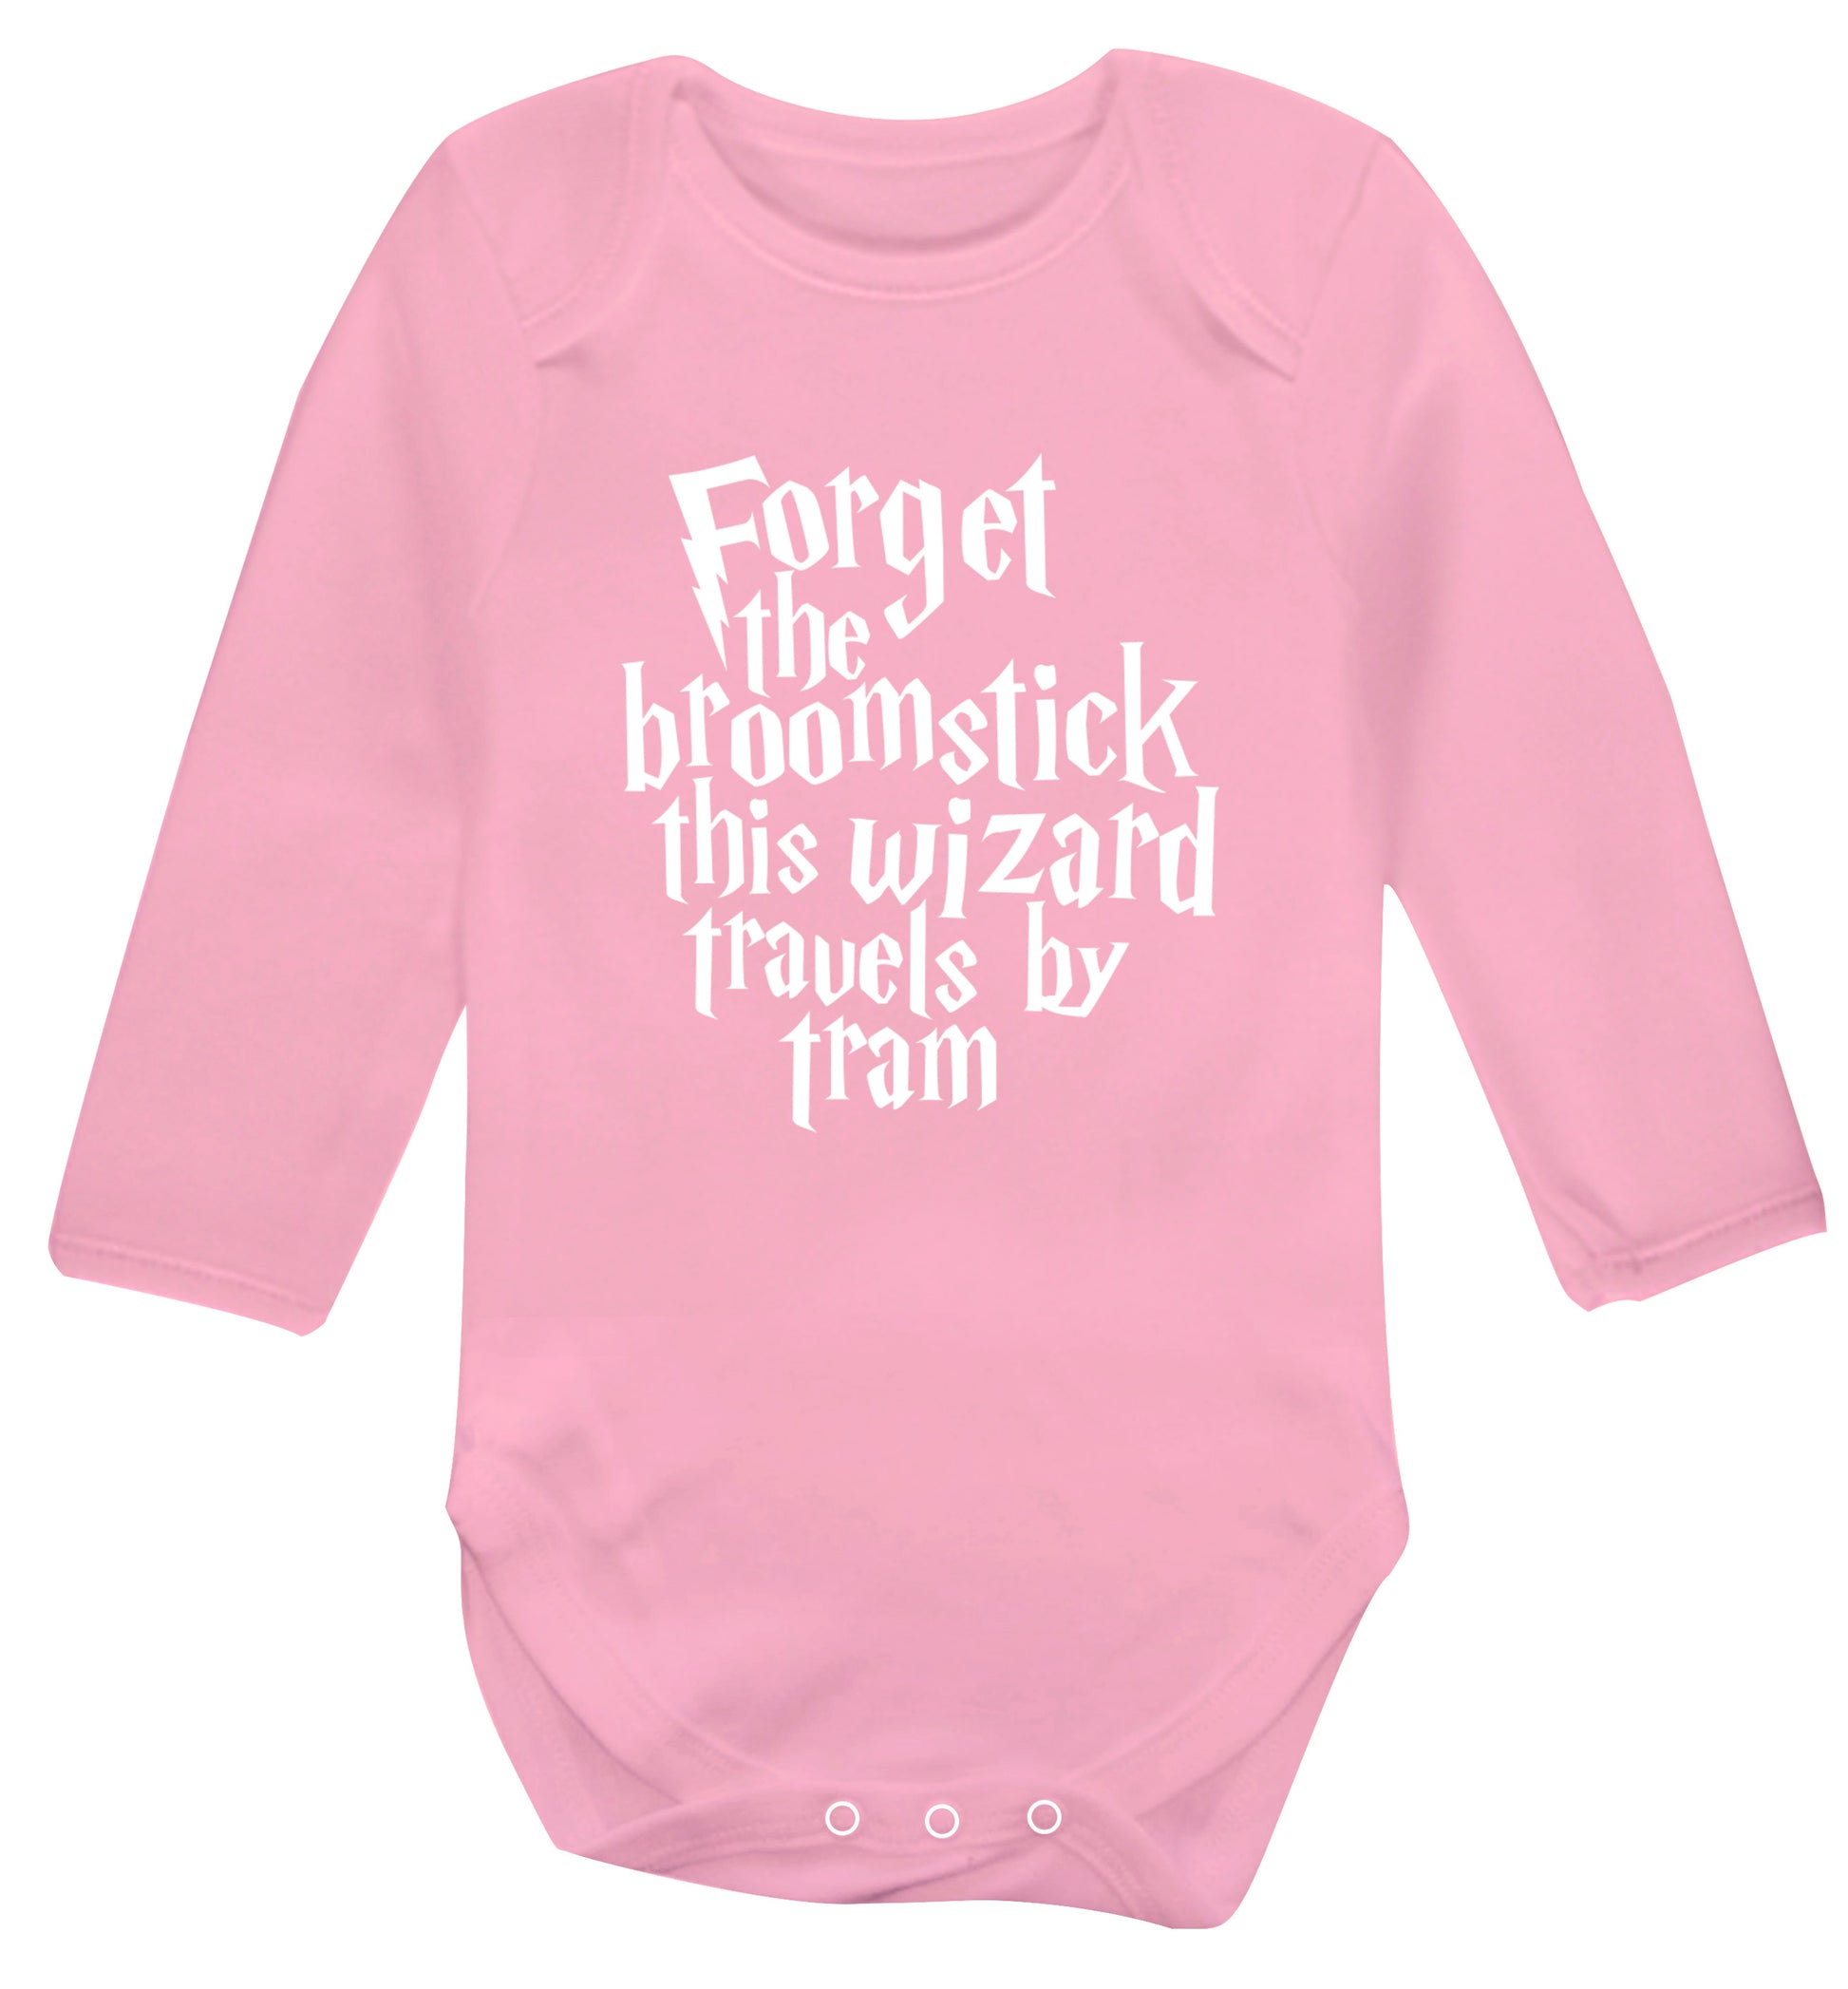 Forget the broomstick this wizard travels by tram Baby Vest long sleeved pale pink 6-12 months